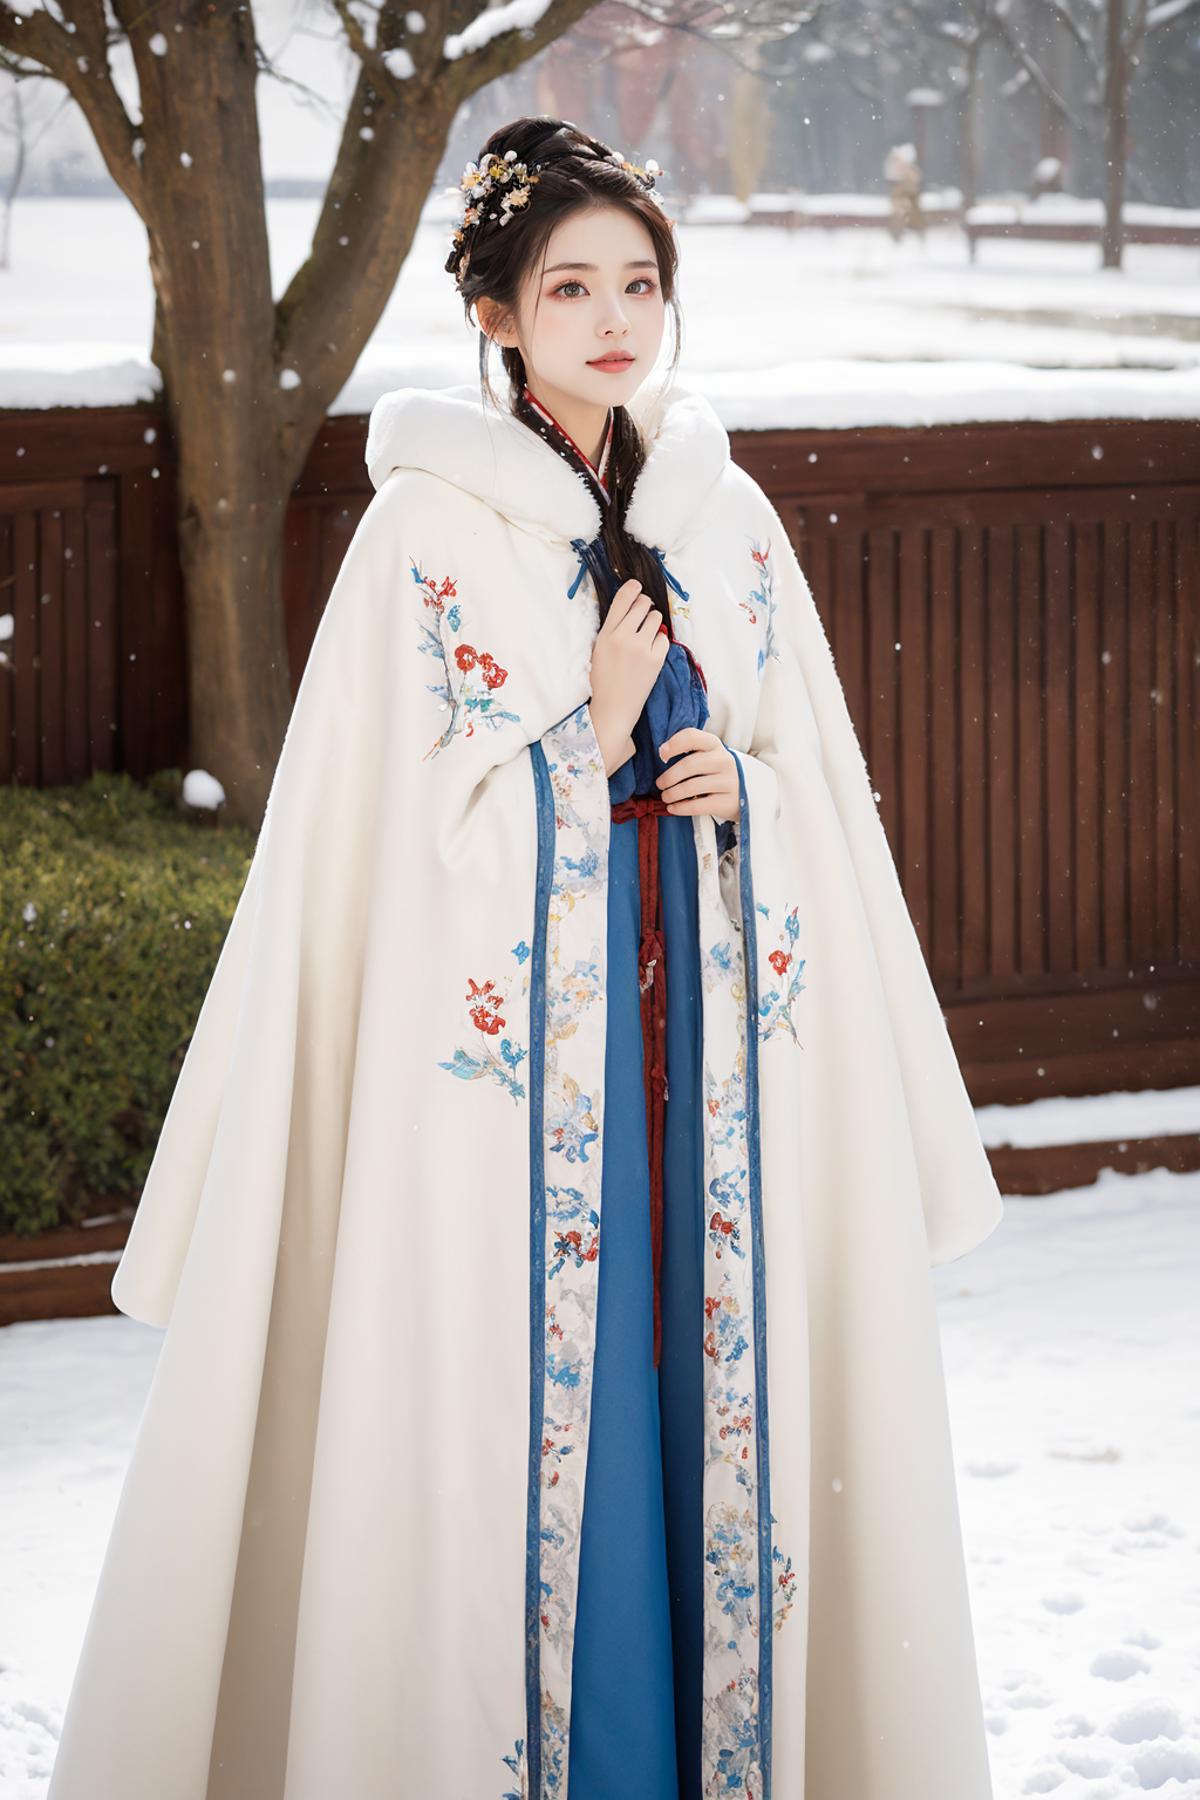 A woman wearing a blue dress and a white coat with flower designs on it, standing in the snow.